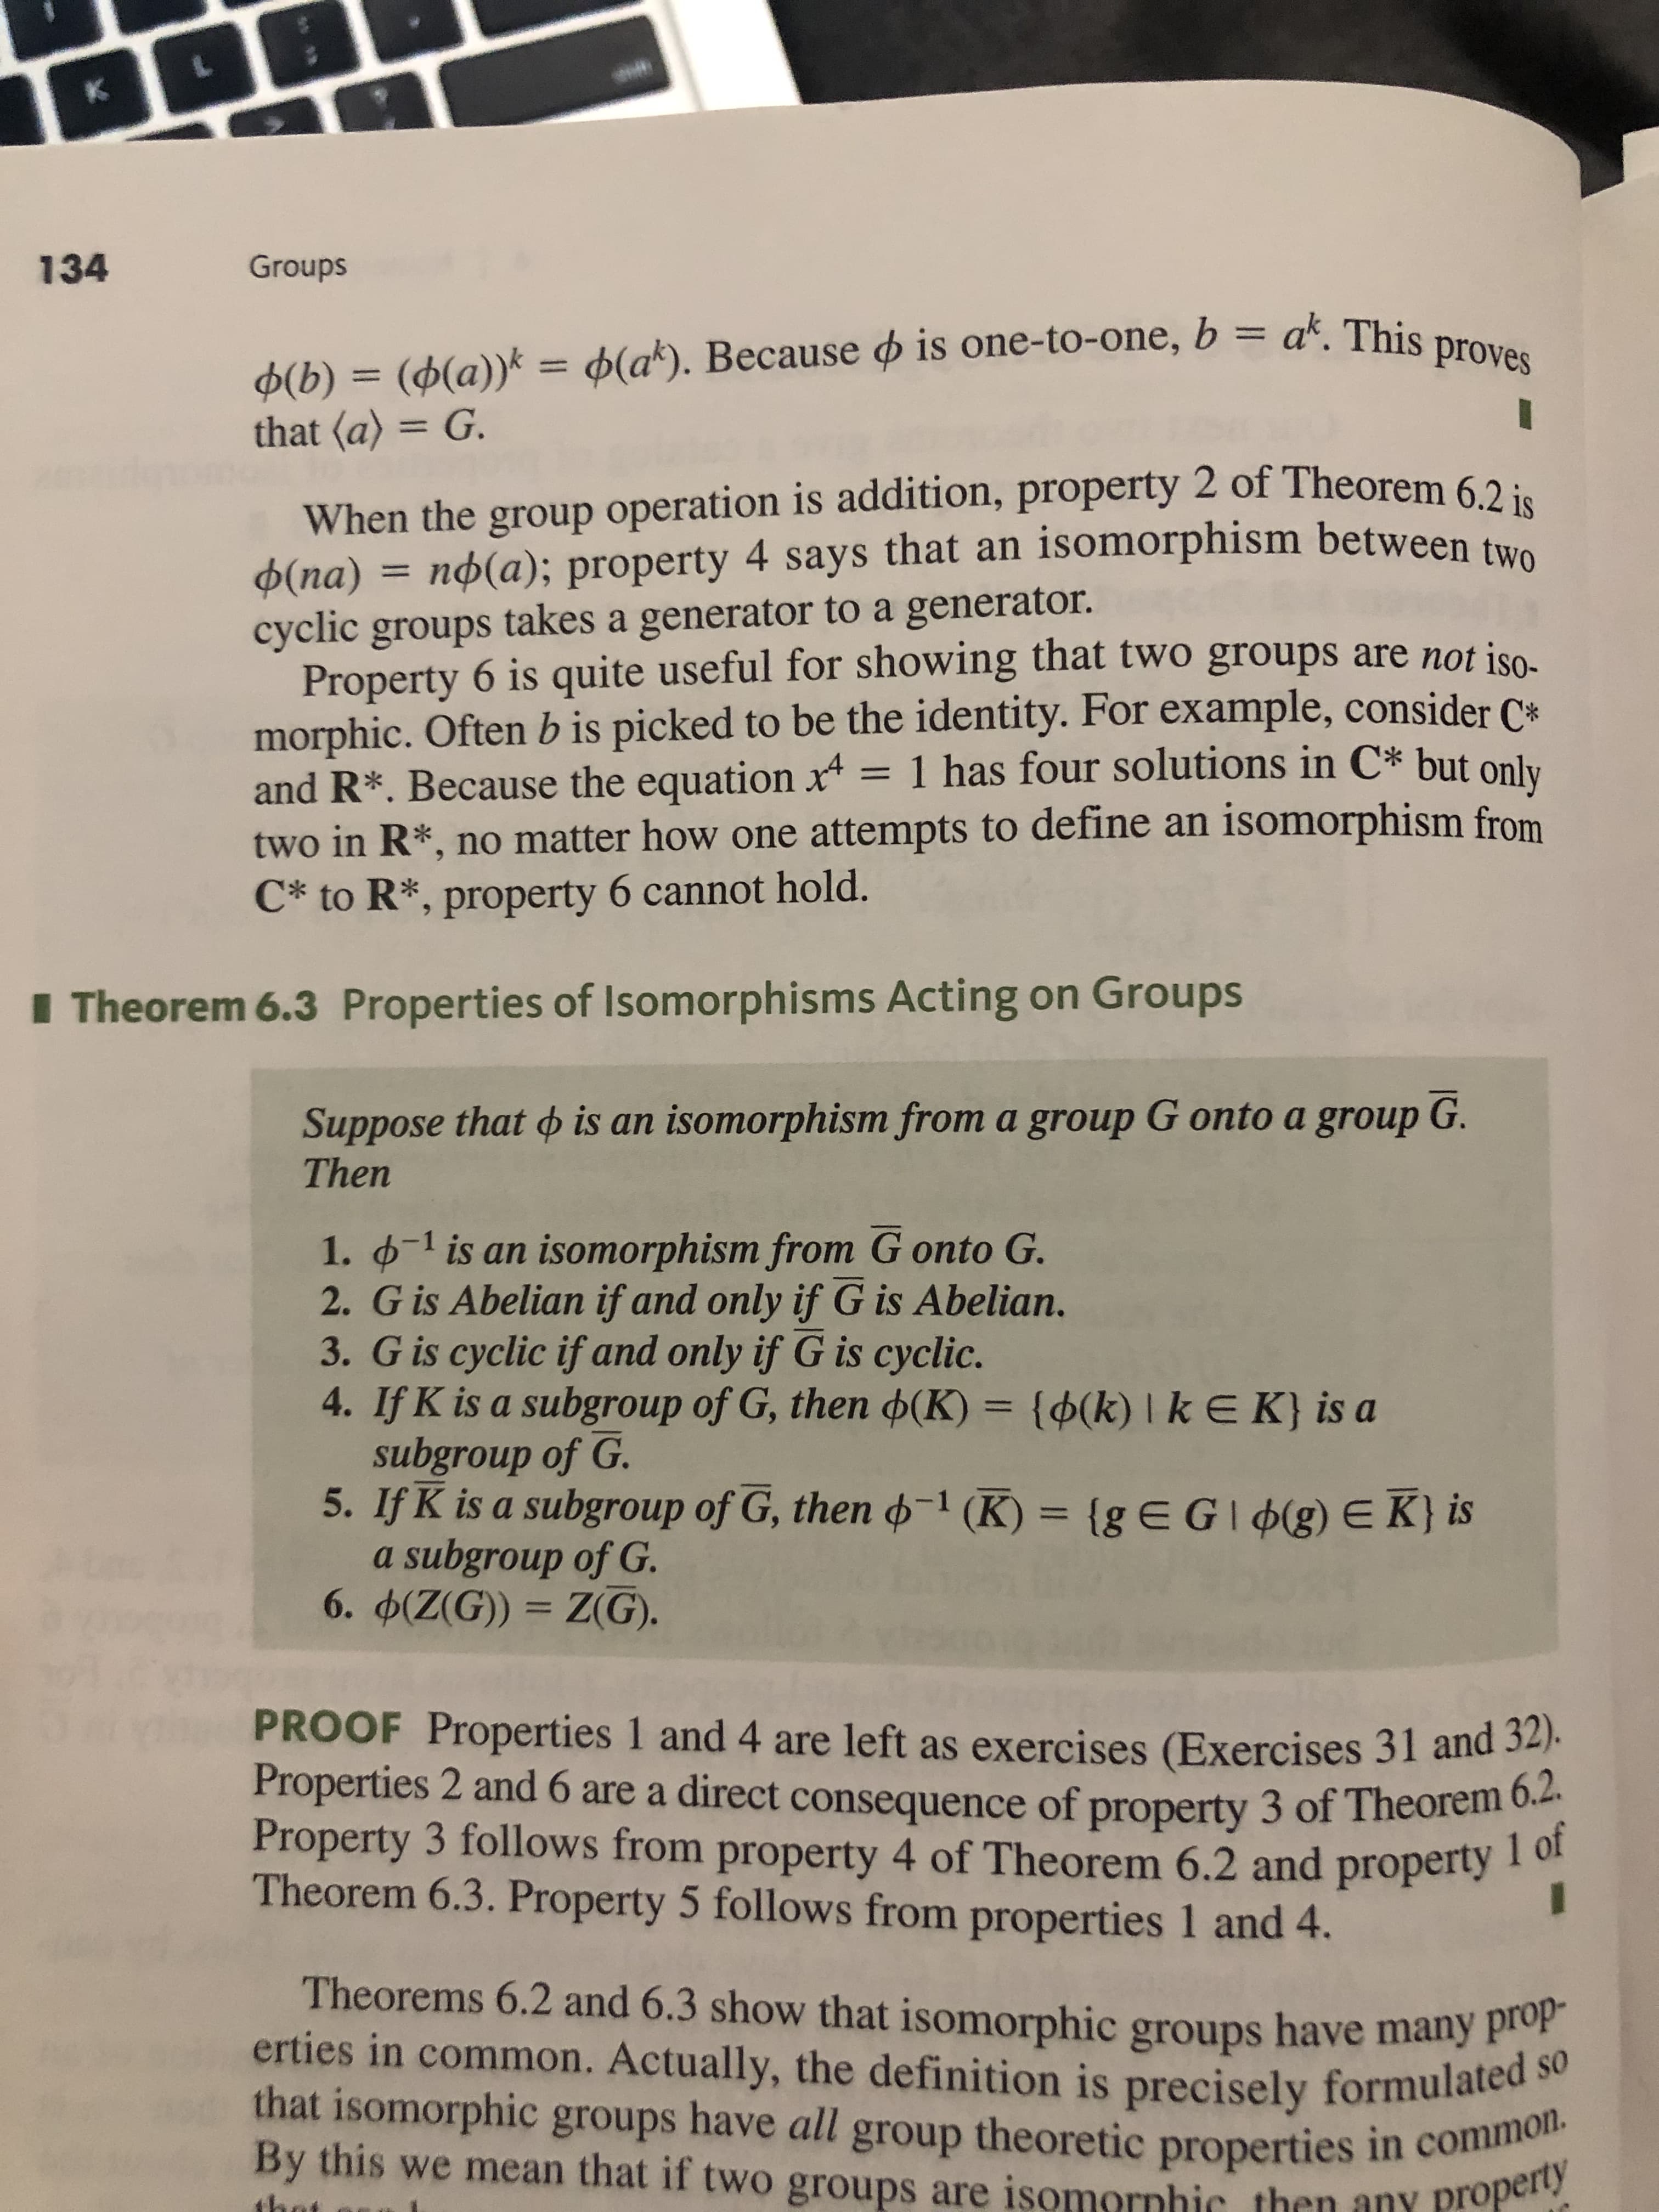 K
134
Groups
((a)) = (ak). Because is one-to-one, b = a*. This proves
(b)
that (a) = G.
When the group operation is addition, property 2 of Theorem 6.2 is
np(a); property 4 says that an isomorphism between two
Ф(па)
cyclic groups takes a generator to a generator.
Property 6 is quite useful for showing that two groups are not iso
morphic. Often b is picked to be the identity. For example, consider C
and R*. Because the equation x = 1 has four solutions in C* but only
two in R*, no matter how one attempts to define an isomorphism from
C* to R*, property 6 cannot hold.
Theorem 6.3 Properties of Isomorphisms Acting on Groups
Suppose that o is an isomorphism from a group G onto a group G.
Then
1. 1 is an isomorphism from G onto G.
2. G is Abelian if and only if G is Abelian.
3. G is cyclic if and only if G is cyclic.
4. If K is a subgroup of G, then (K) = {¢(k) | k E K} is a
subgroup of G.
5. If K is a subgroup of G, then 1 (K) {g EGI(g) e K} is
a subgroup of G.
6. d(Z(G)) Z(G).
PROOF Properties 1 and 4 are left as exercises (Exercises 31 and 32).
Properties 2 and 6 are a direct consequence of property 3 of Theorem 6.2.
Property 3 follows from property 4 of Theorem 6.2 and property 1 of
Theorem 6.3. Property 5 follows from properties 1 and 4.
Theorems 6.2 and 6.3 show that isomorphic groups have many prop-
erties in common. Actually, the definition is precisely formulated so
that isomorphic groups have all group theoretic properties in common.
By this we mean that if two groups are isomornhic then any property
1h
